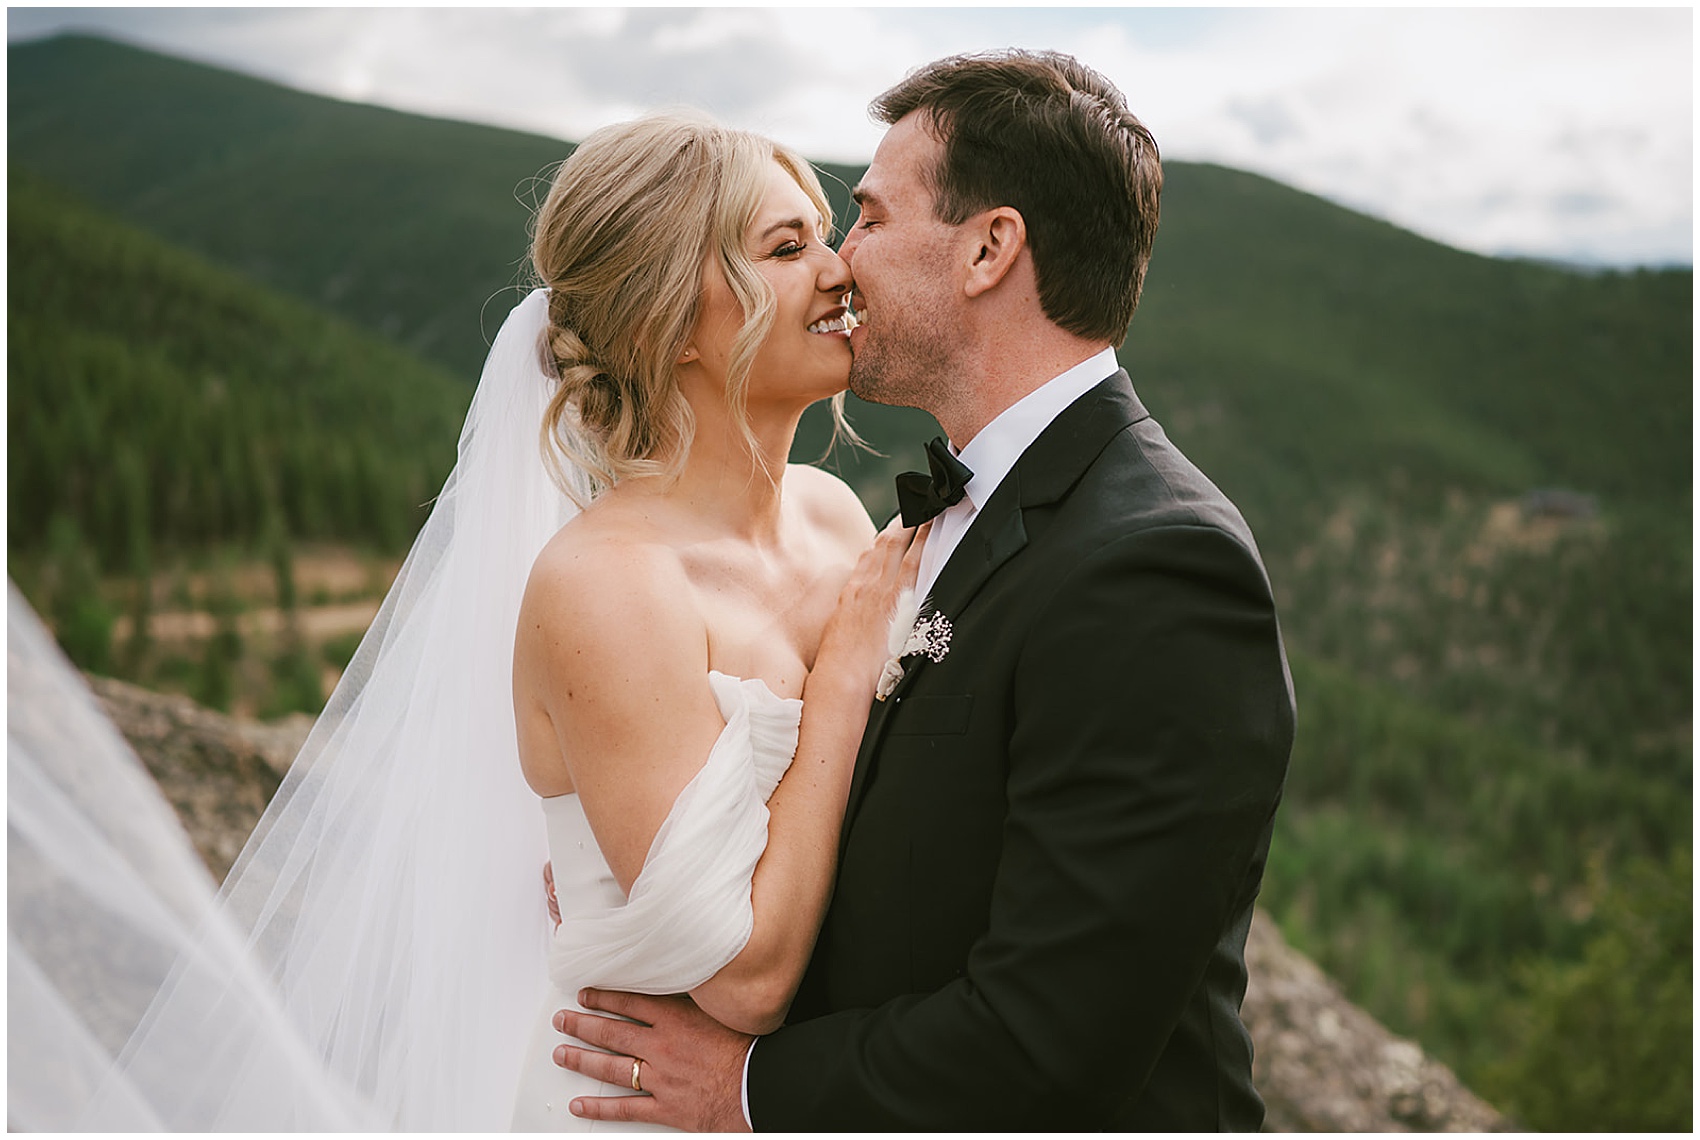 Newlyweds kiss with big smiles kiss on a mountainside trail during their north star gatherings wedding